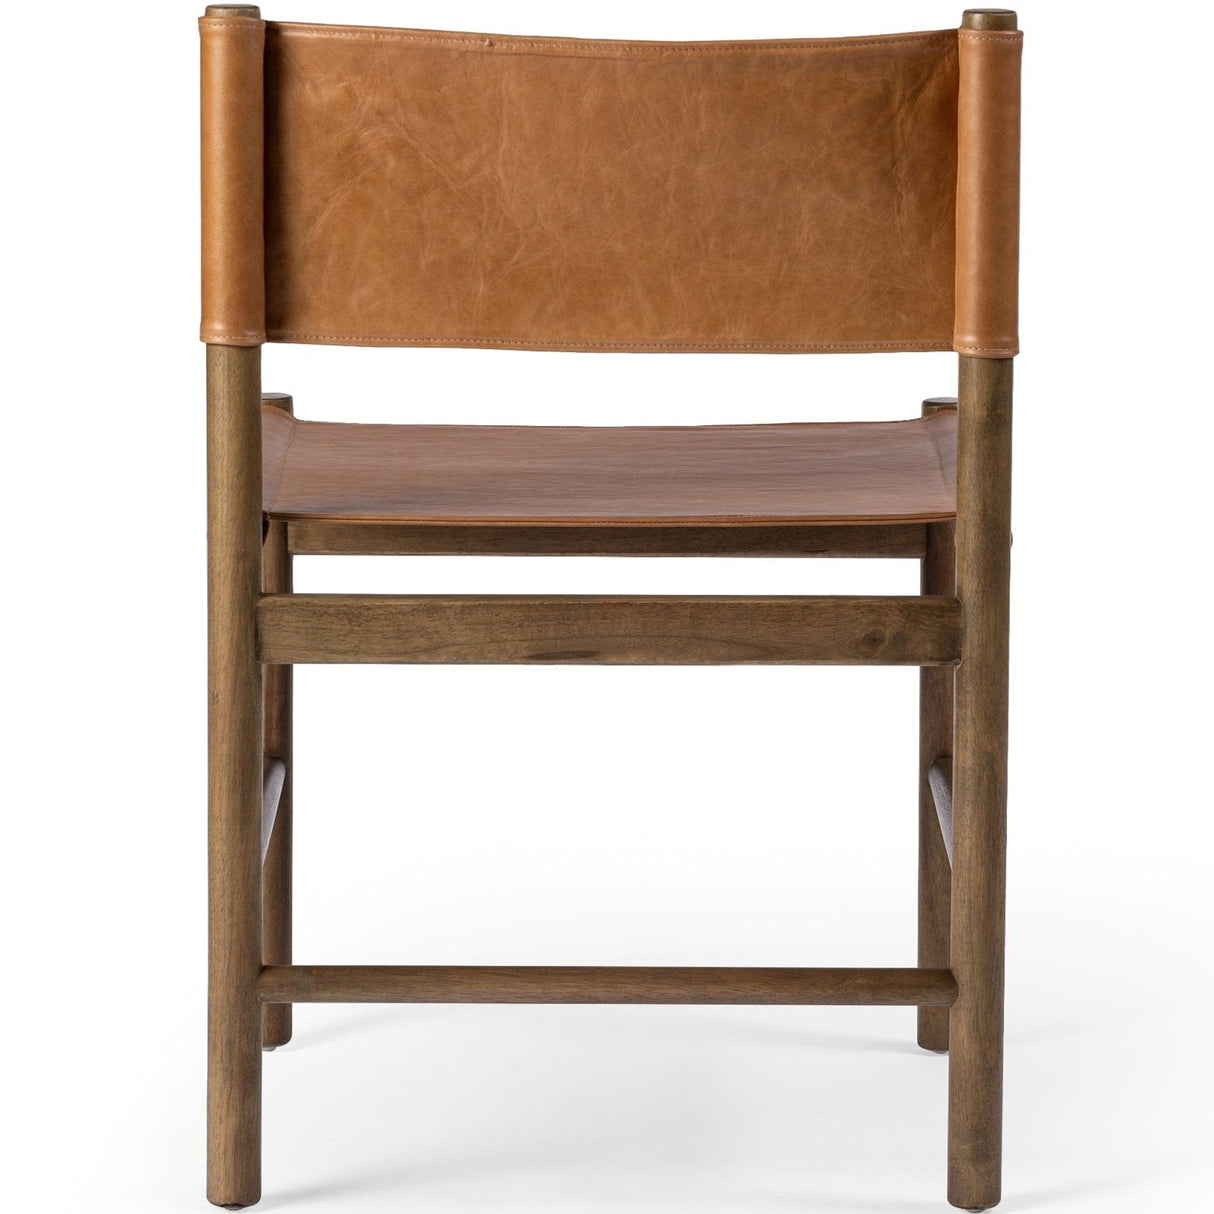 Four Hands Kena Dining Chair Leather Dining Chair